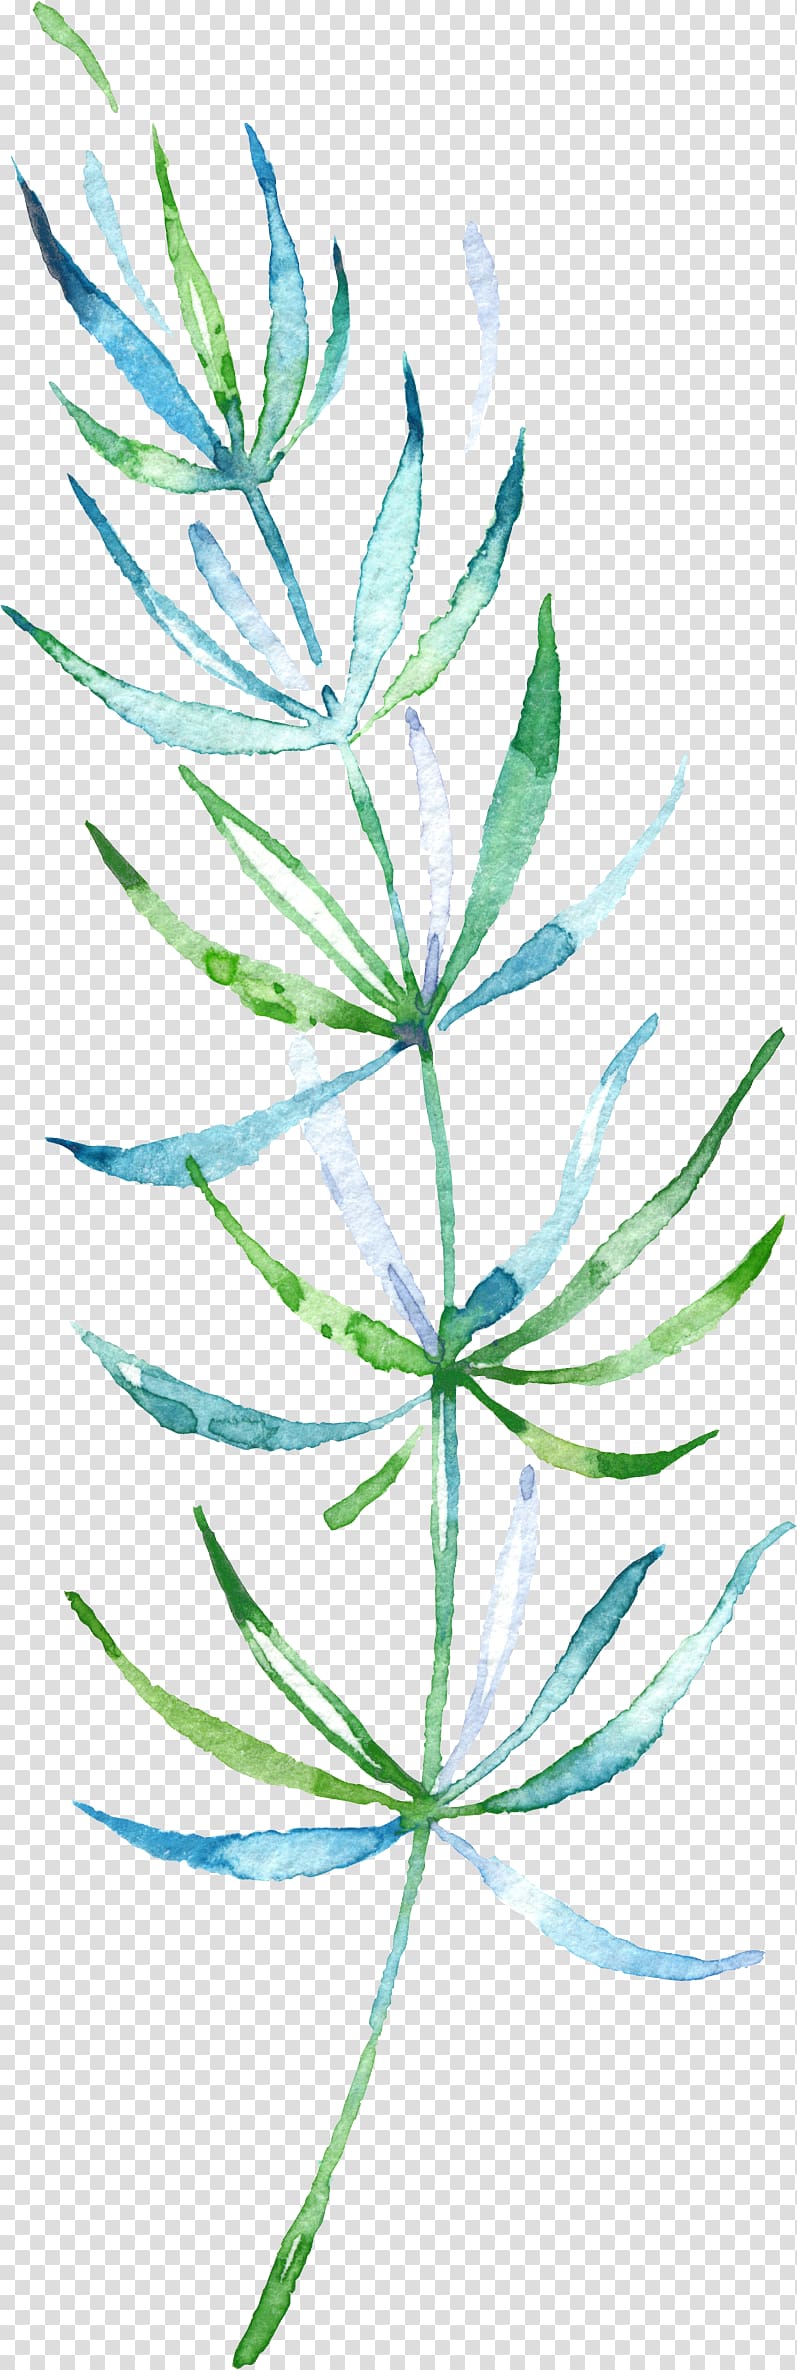 green, teal, and white fern illustration, Watercolor painting Leaf , Drawing plant transparent background PNG clipart